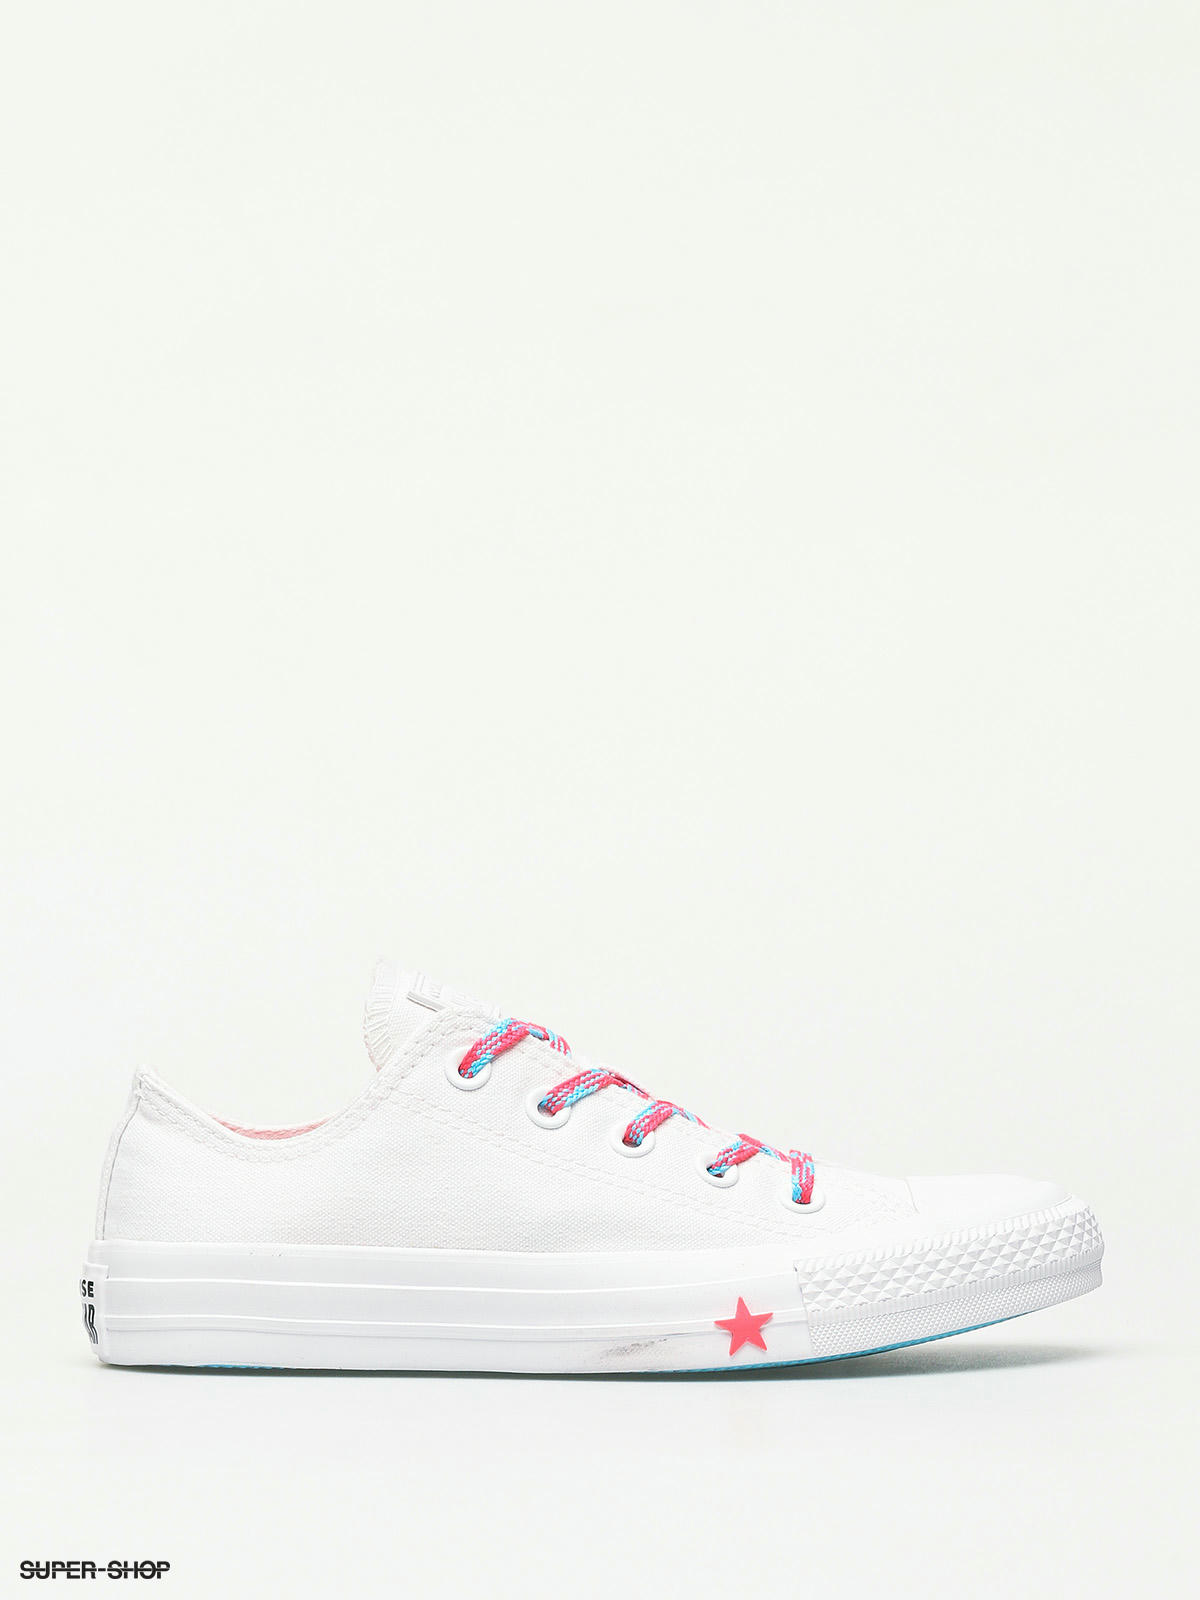 converse all star ox shoes optical white